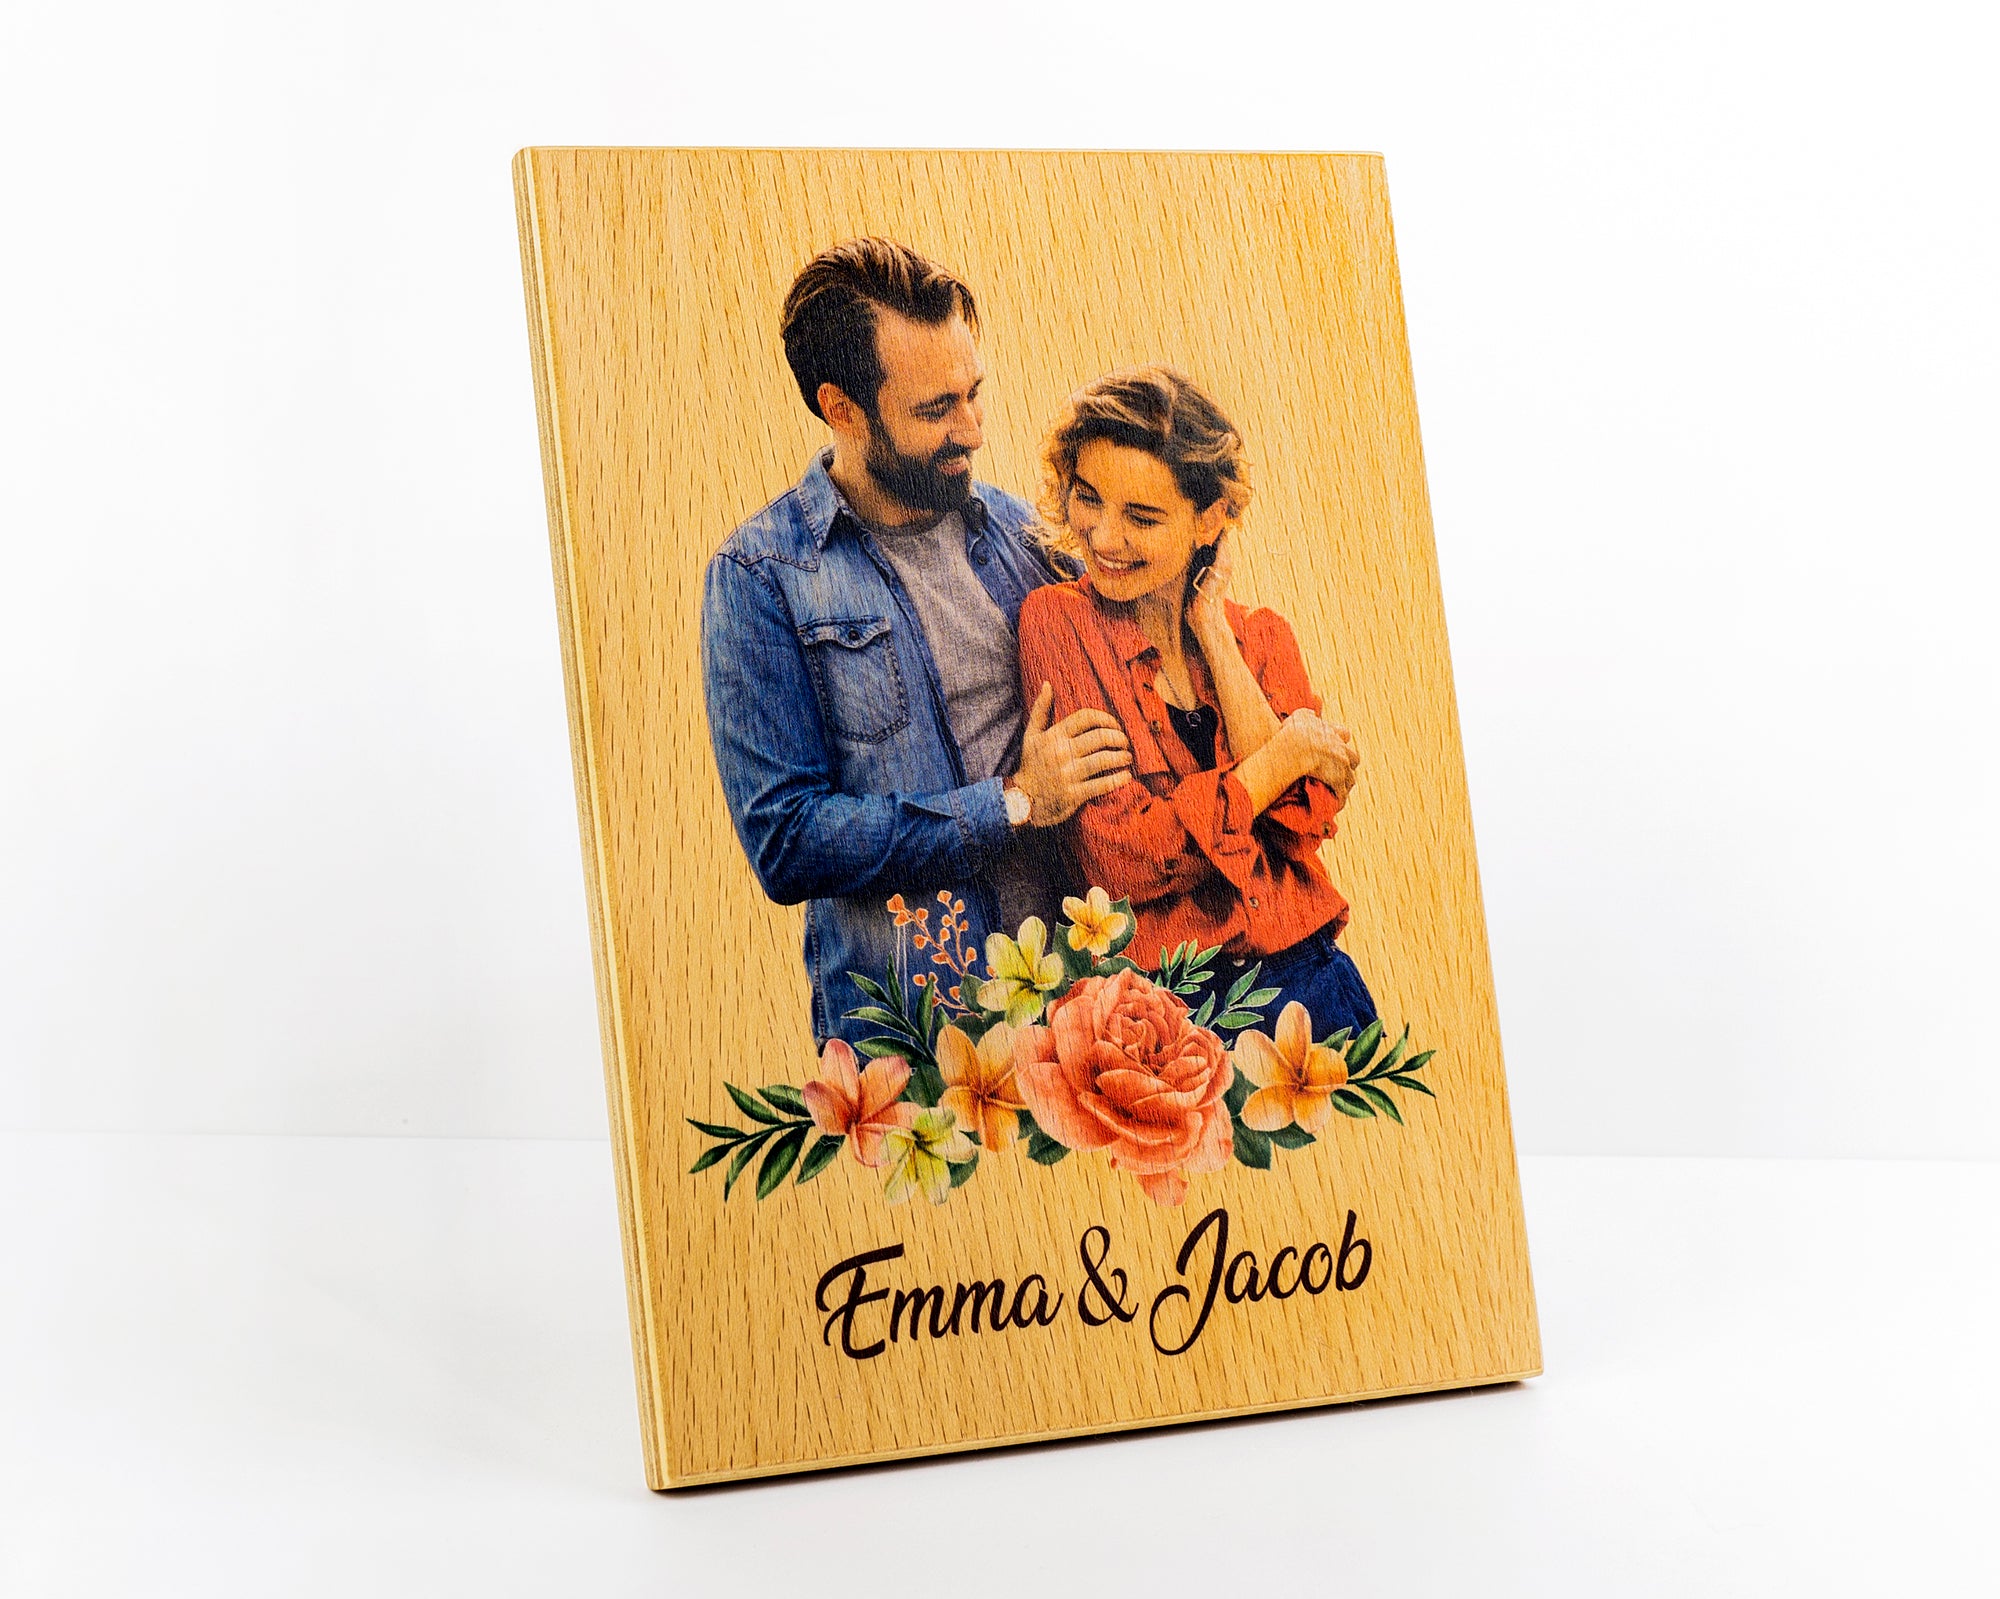 Personalized photo gift on solid wood for special moments of happiness 15x21cm 